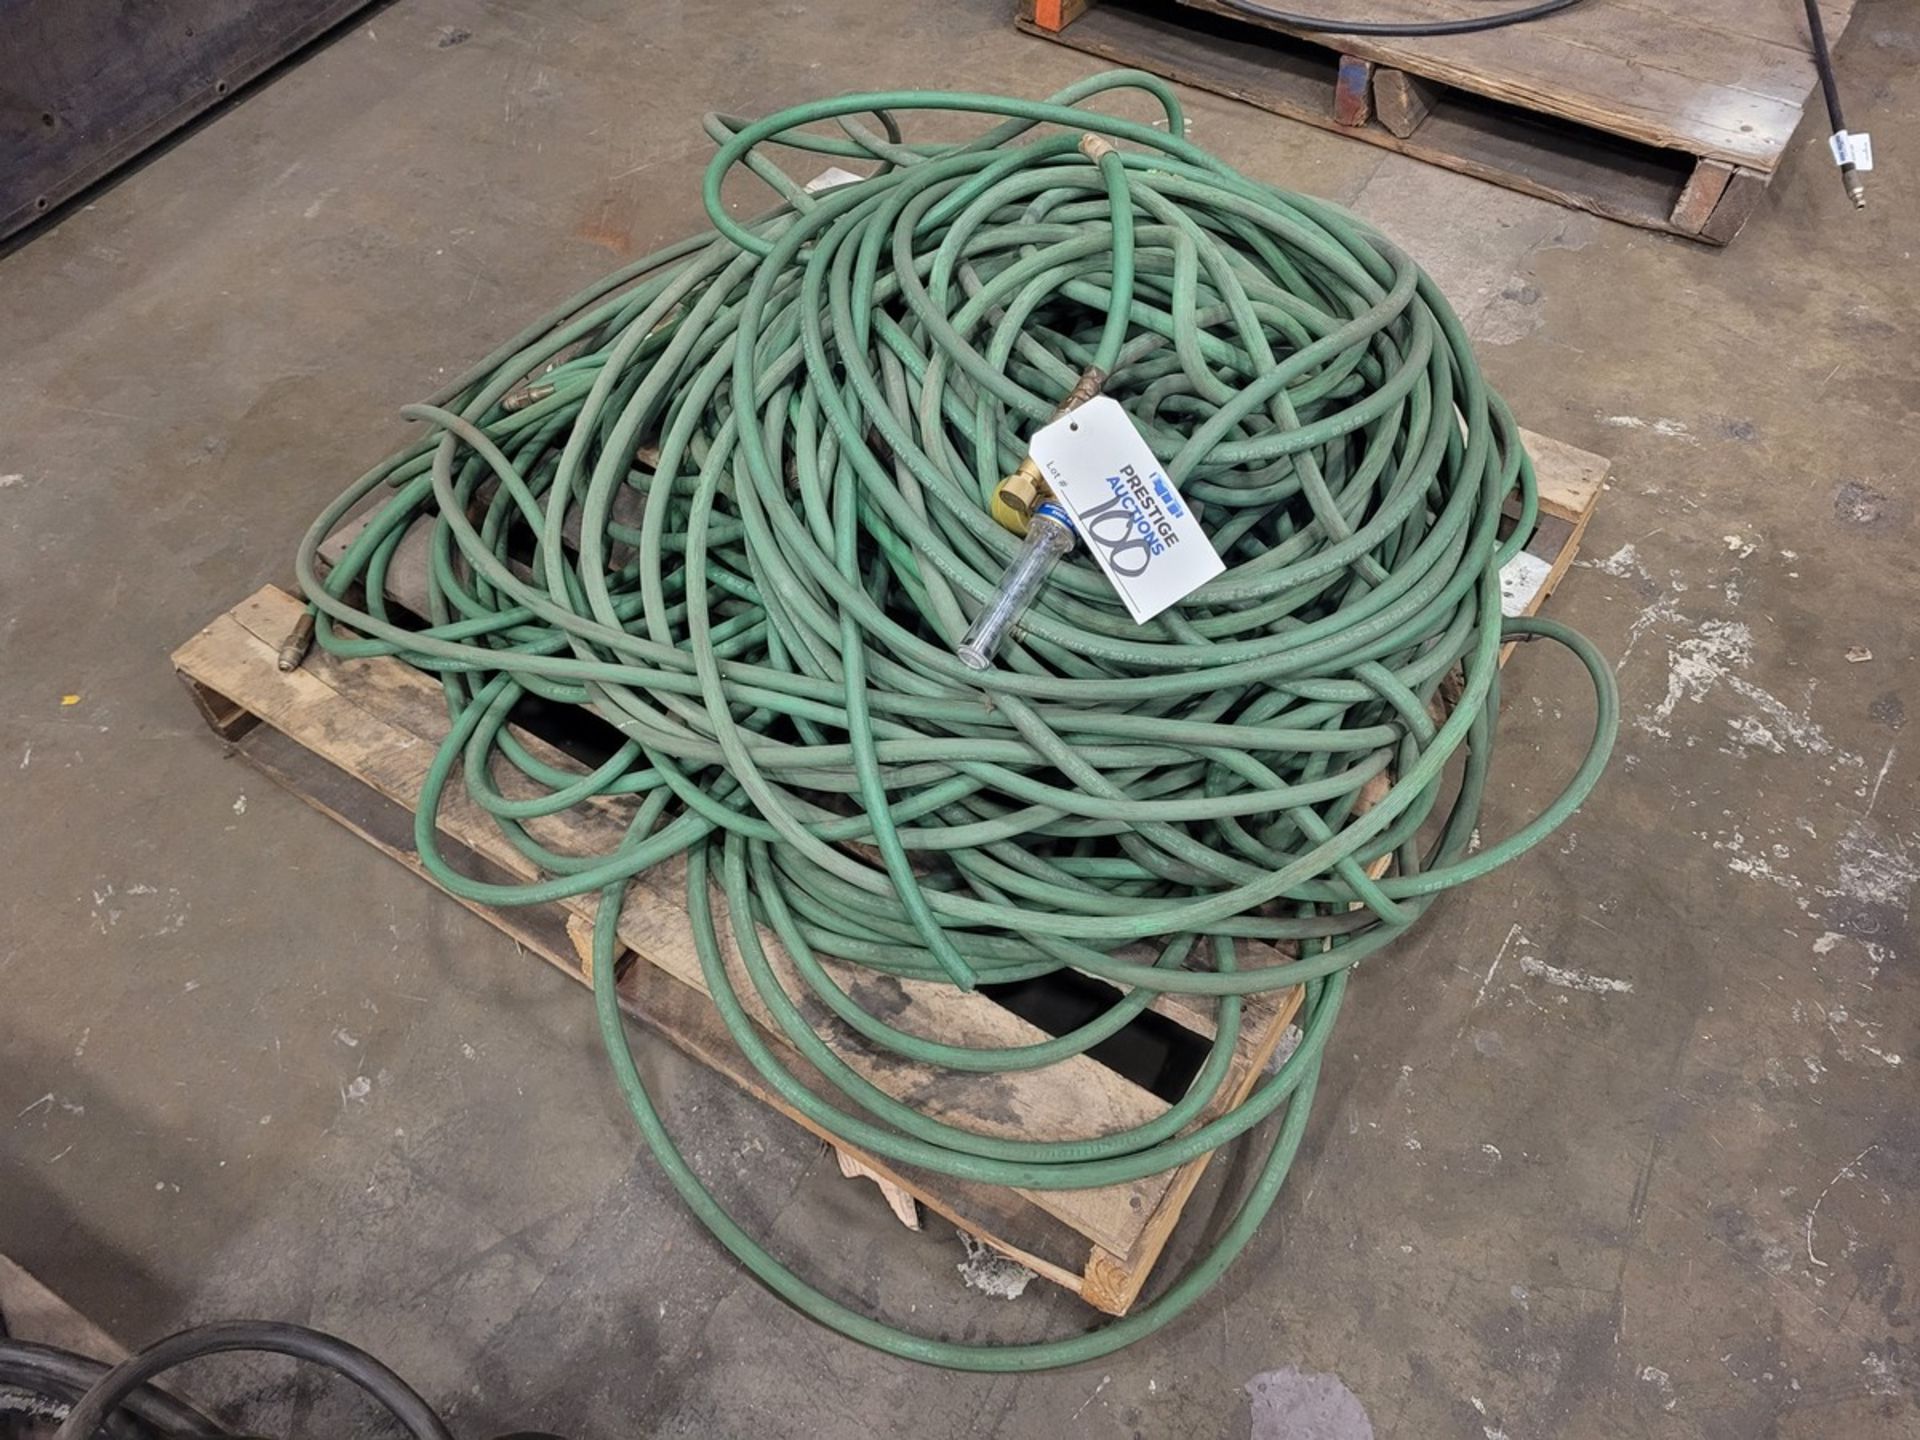 (2) Pallets of Welding Ground Wires, Welding Leads, 3PH Power Cords, Welding Hose Etc. - Image 2 of 2